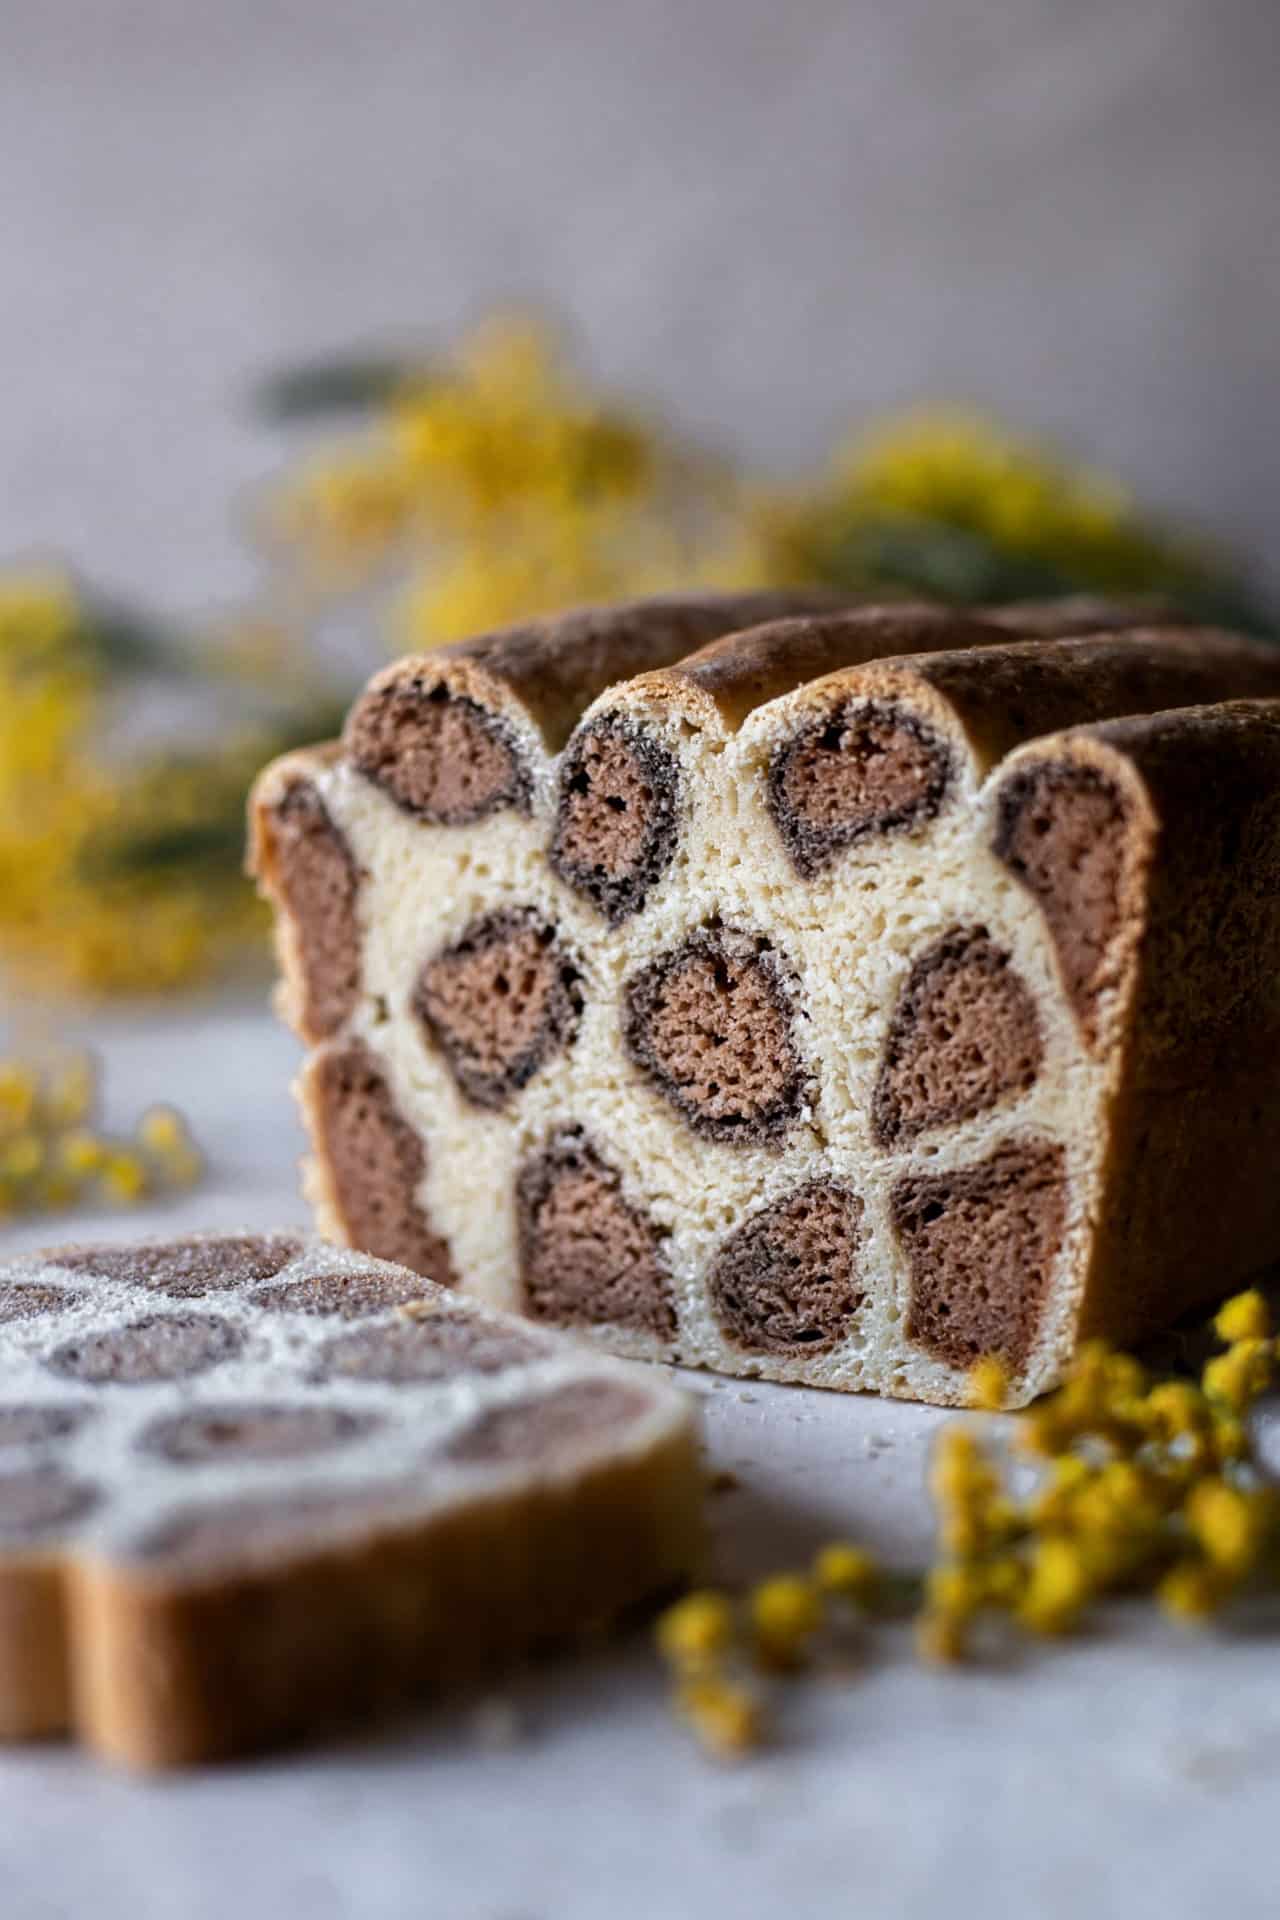 This Gluten-Free Leopard Milk Bread is perfectly sweetened with mild flavours of orange and chocolate which makes it to be perfect as a dessert or mid-day snack.
